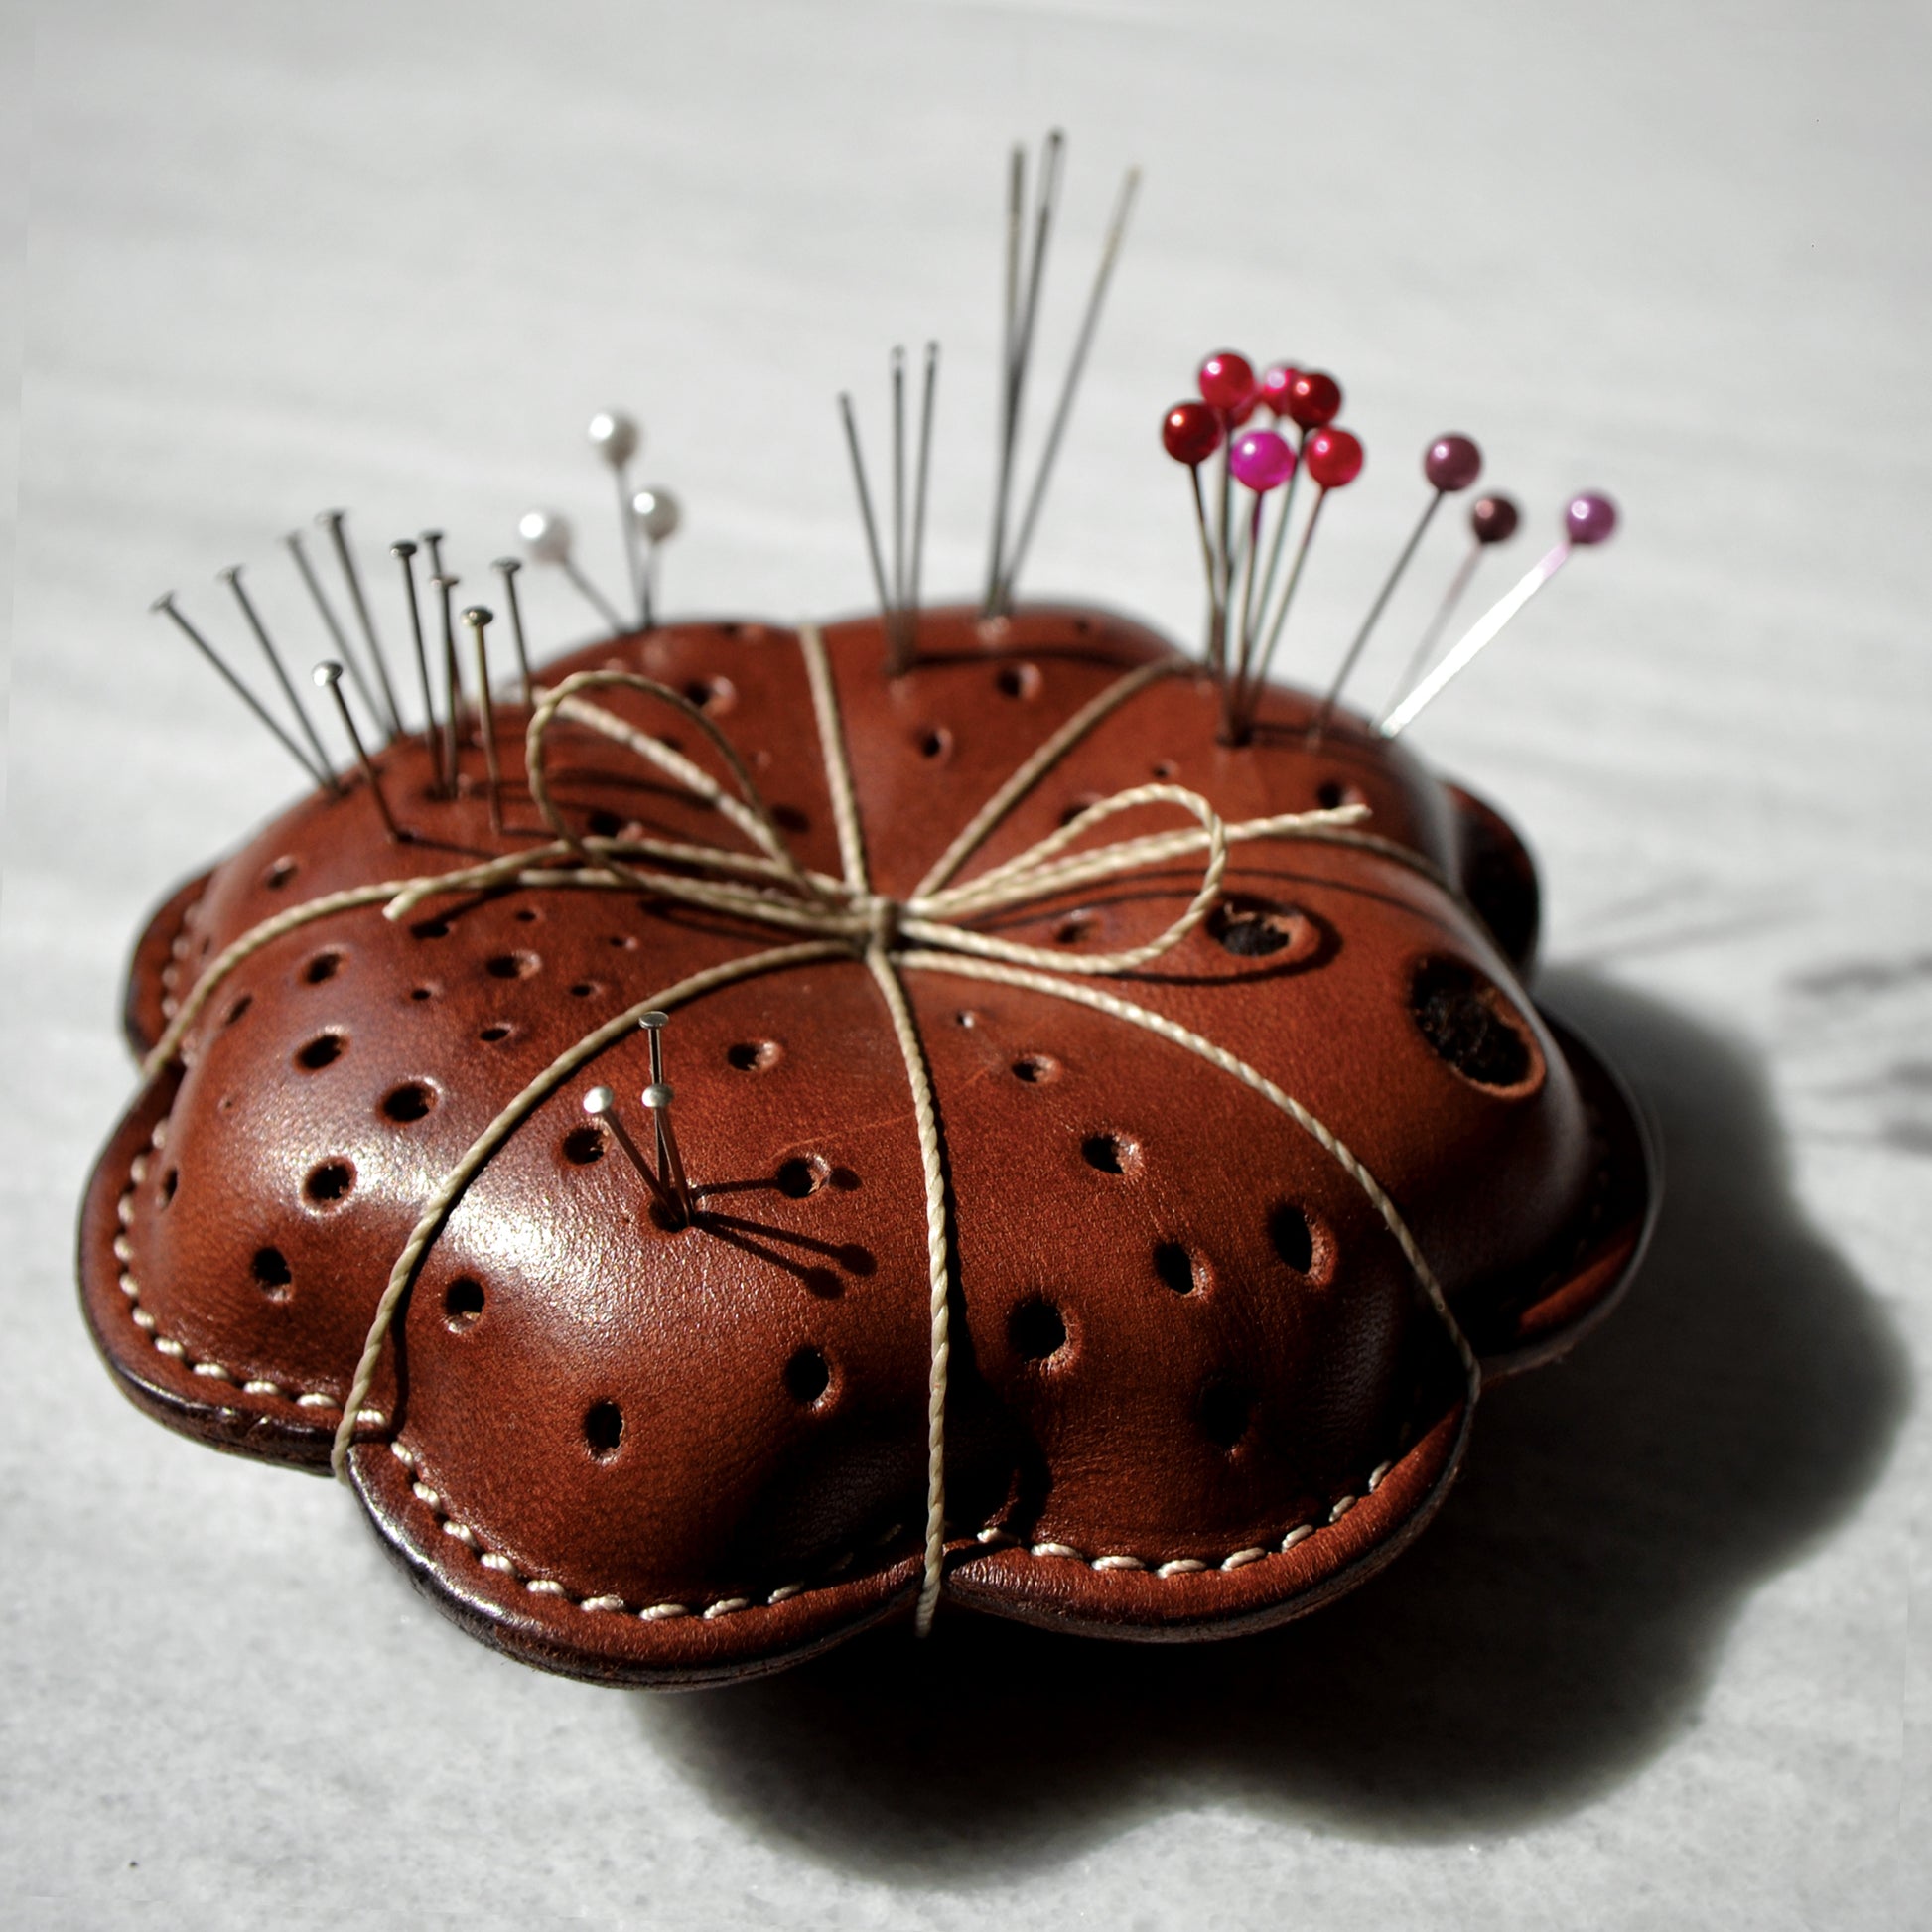 Leather thread-wrapped pillow pin cushion with some pins and needles in it.